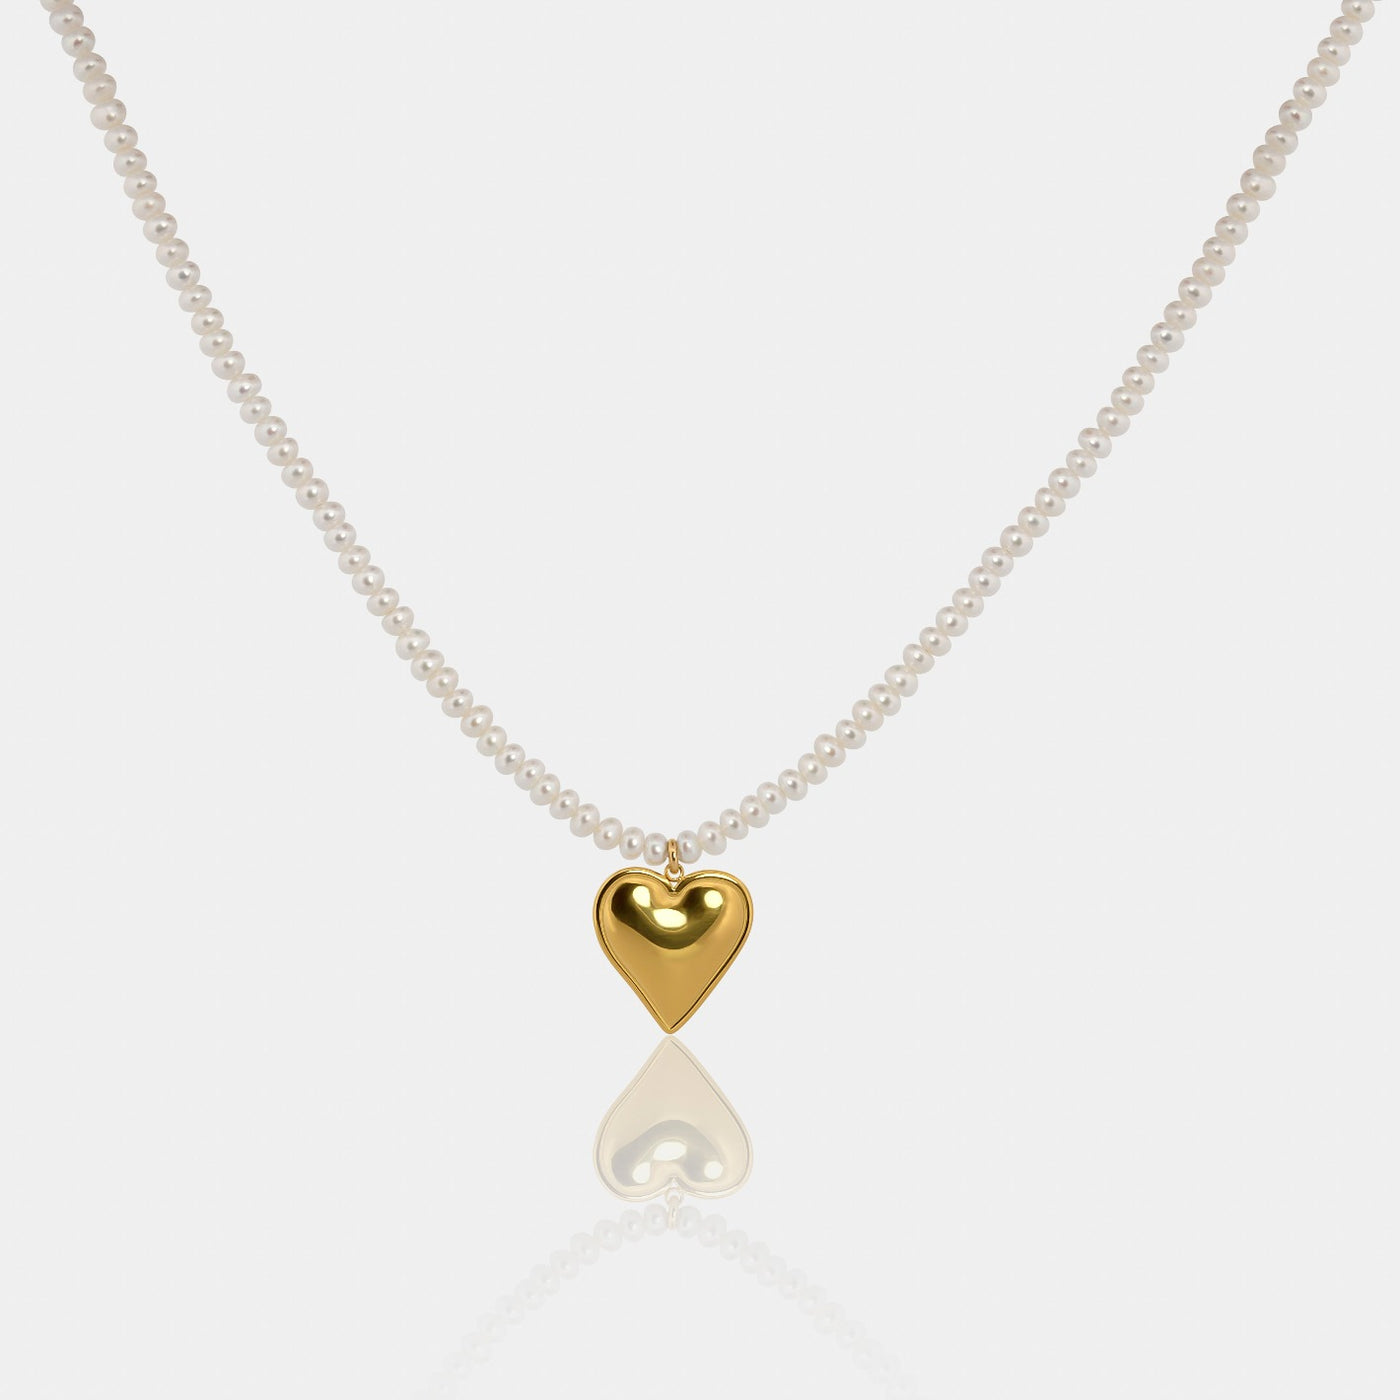 freshwater pearl choker necklace with heart pendant